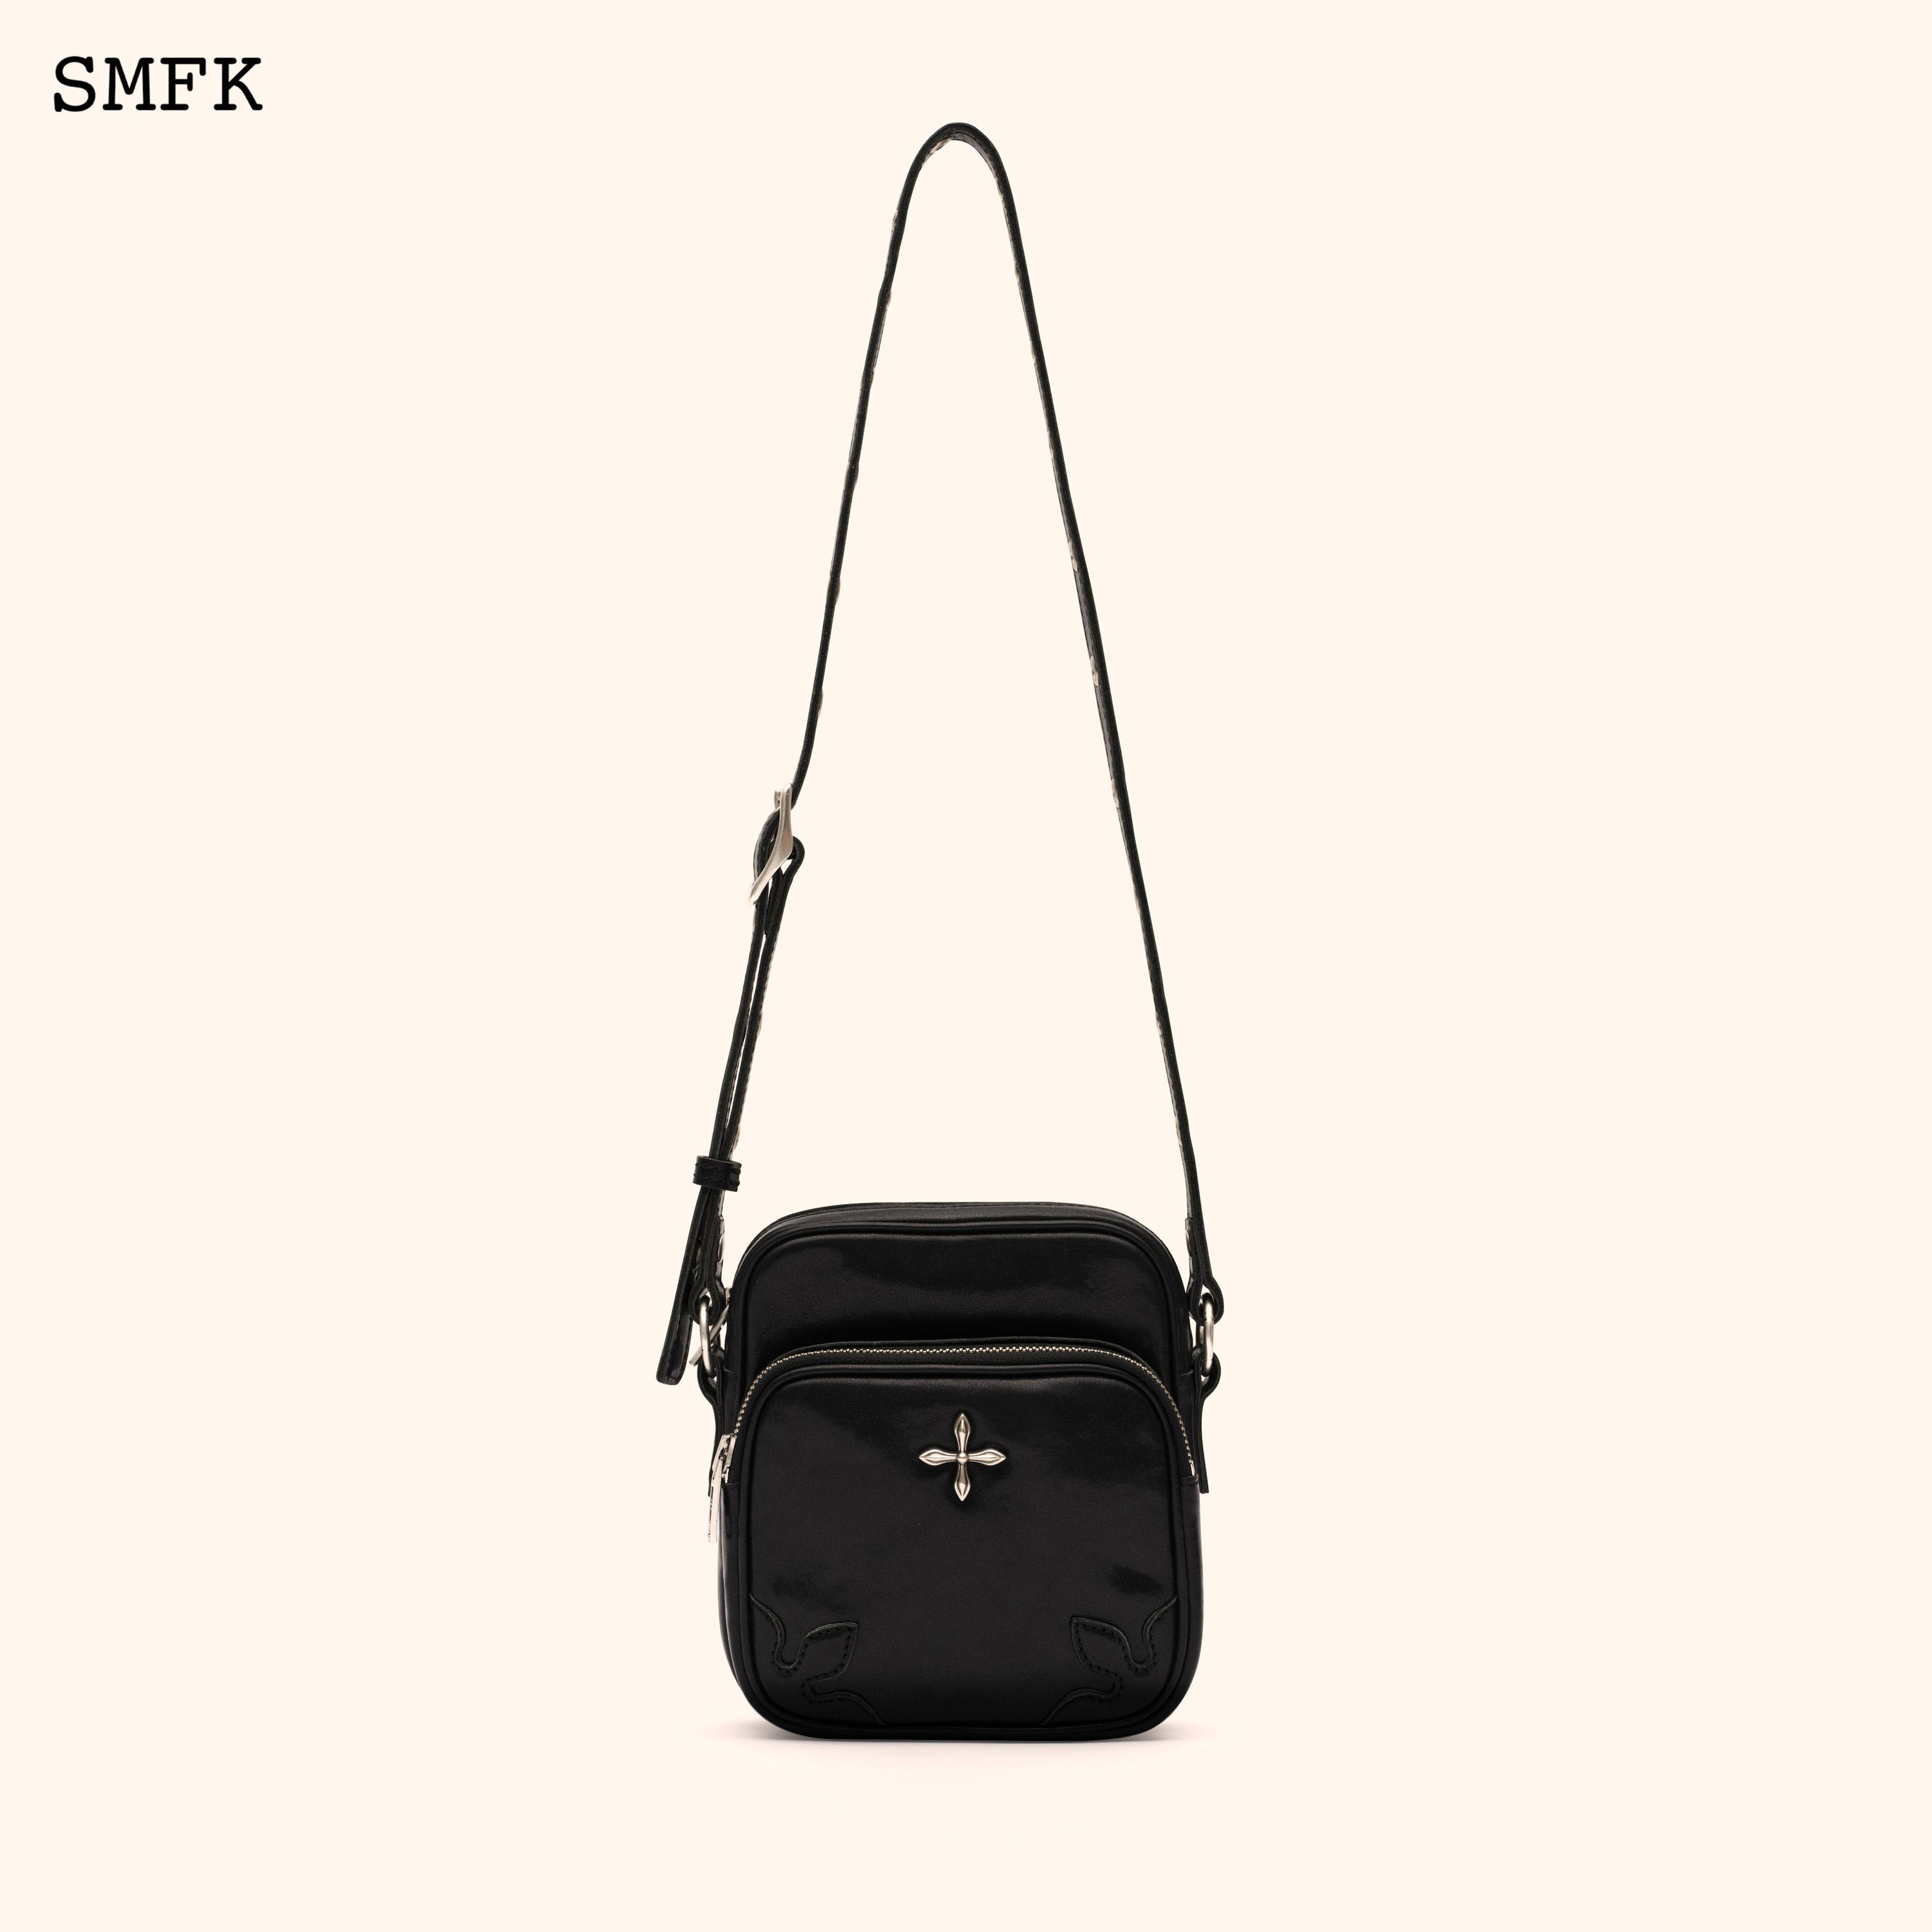 Compass Adventure Vintage Camera Bag In Black (Small) - SMFK Official